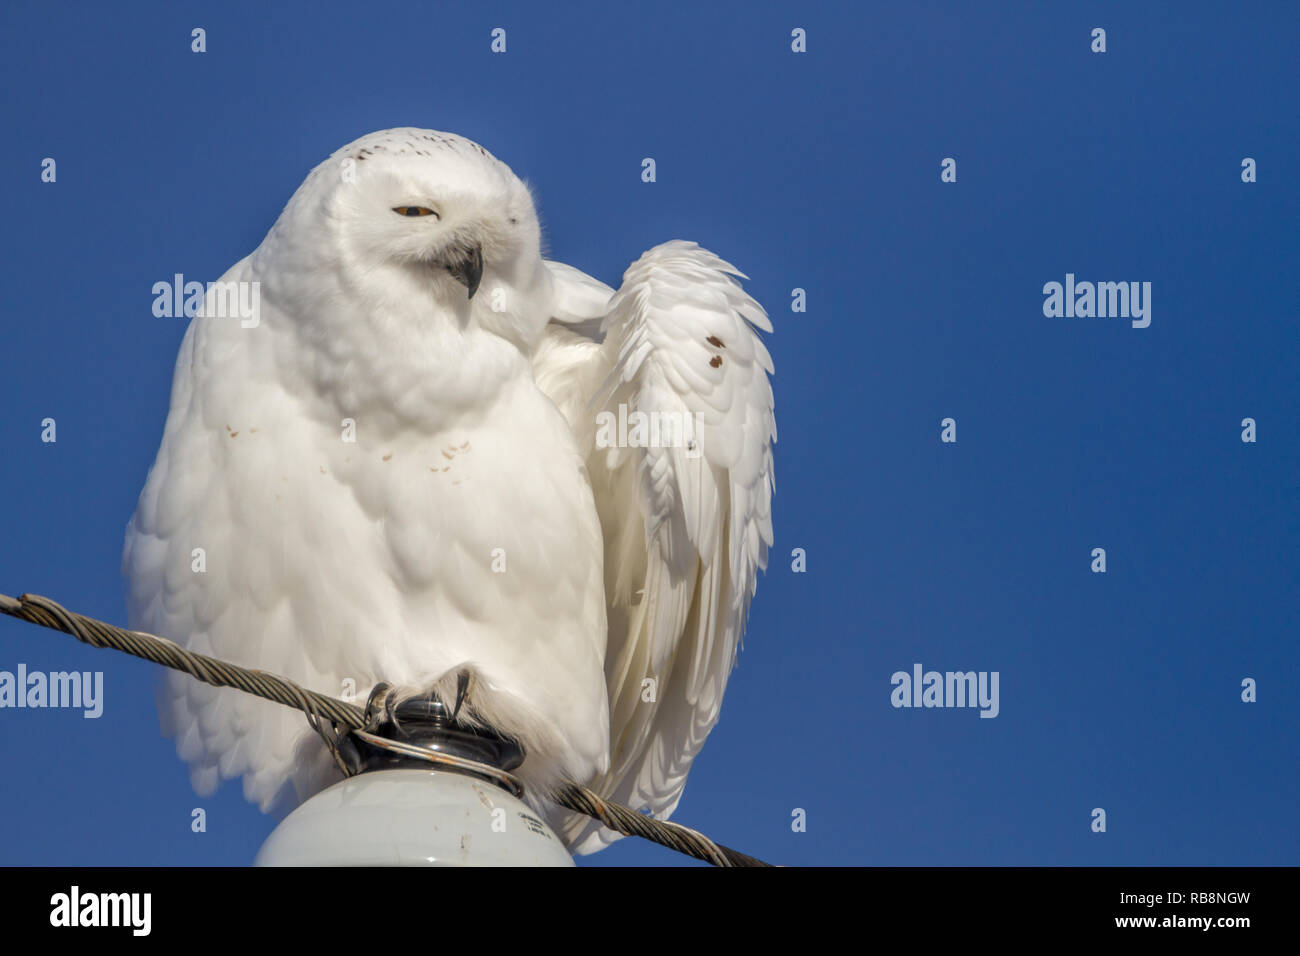 Snow white snowy owl with wing out, talons visible, frontal view, against blue sky on sunny day in rural Alberta, Canada. Room for text. Stock Photo